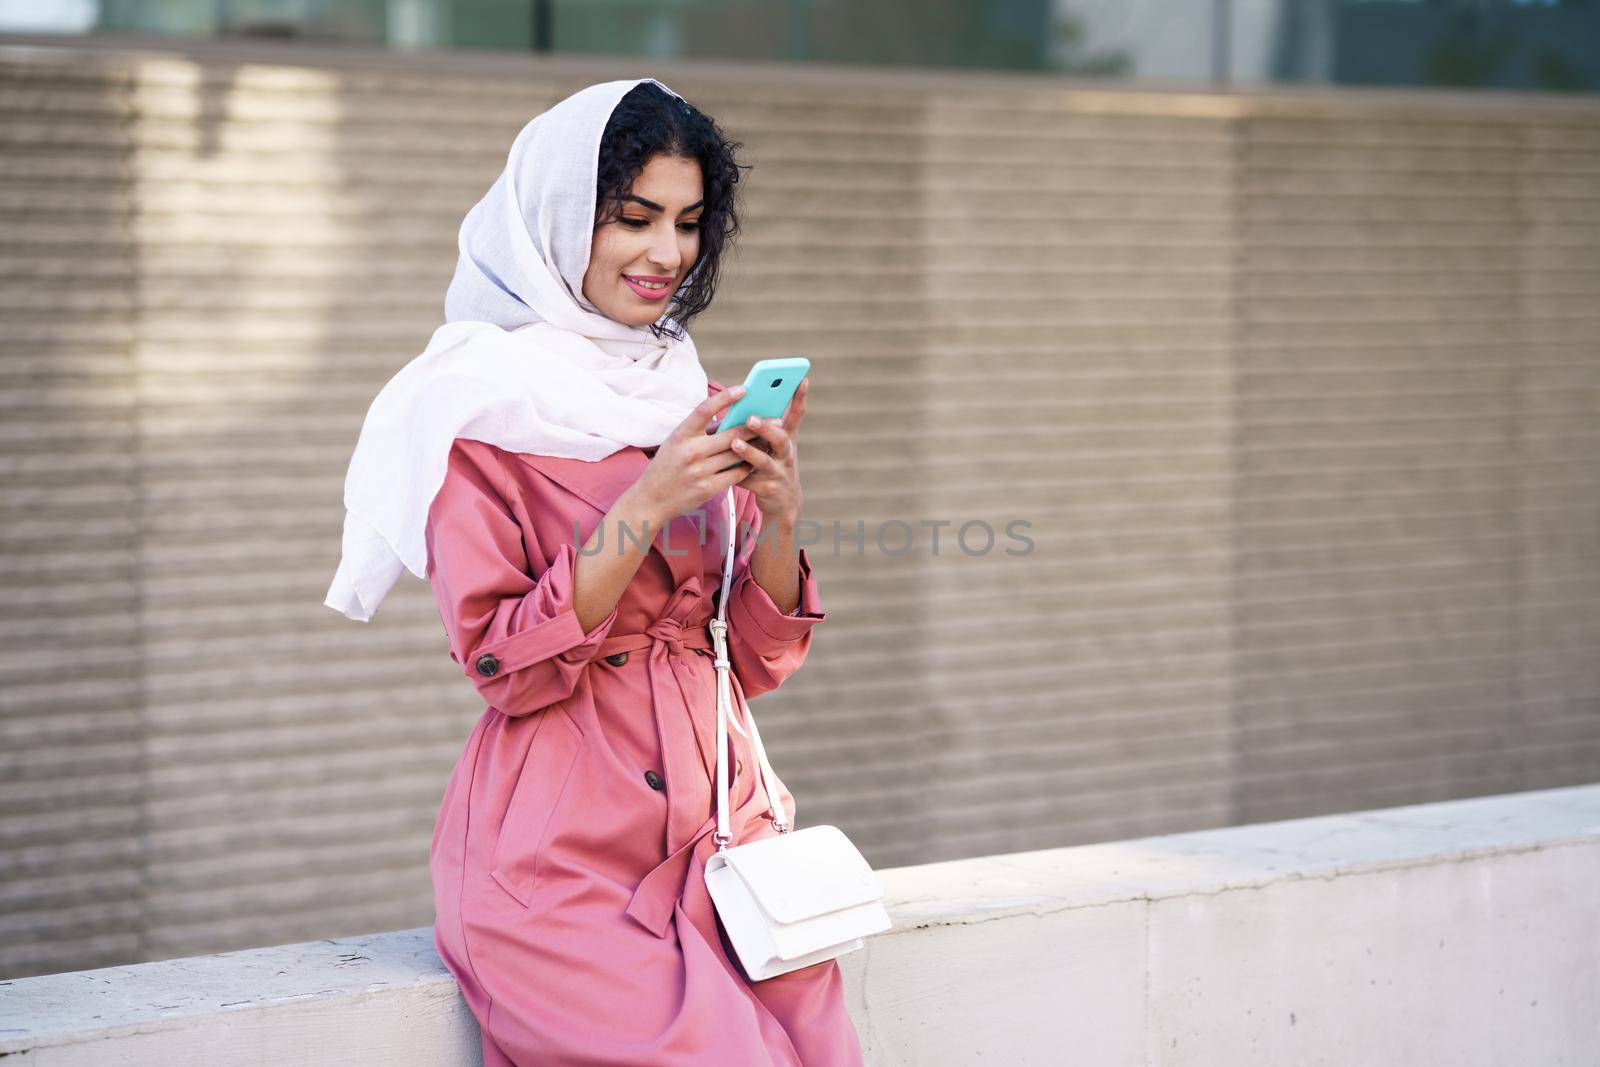 Young Arab woman wearing hijab headscarf texting message with her smartphone in urban background.